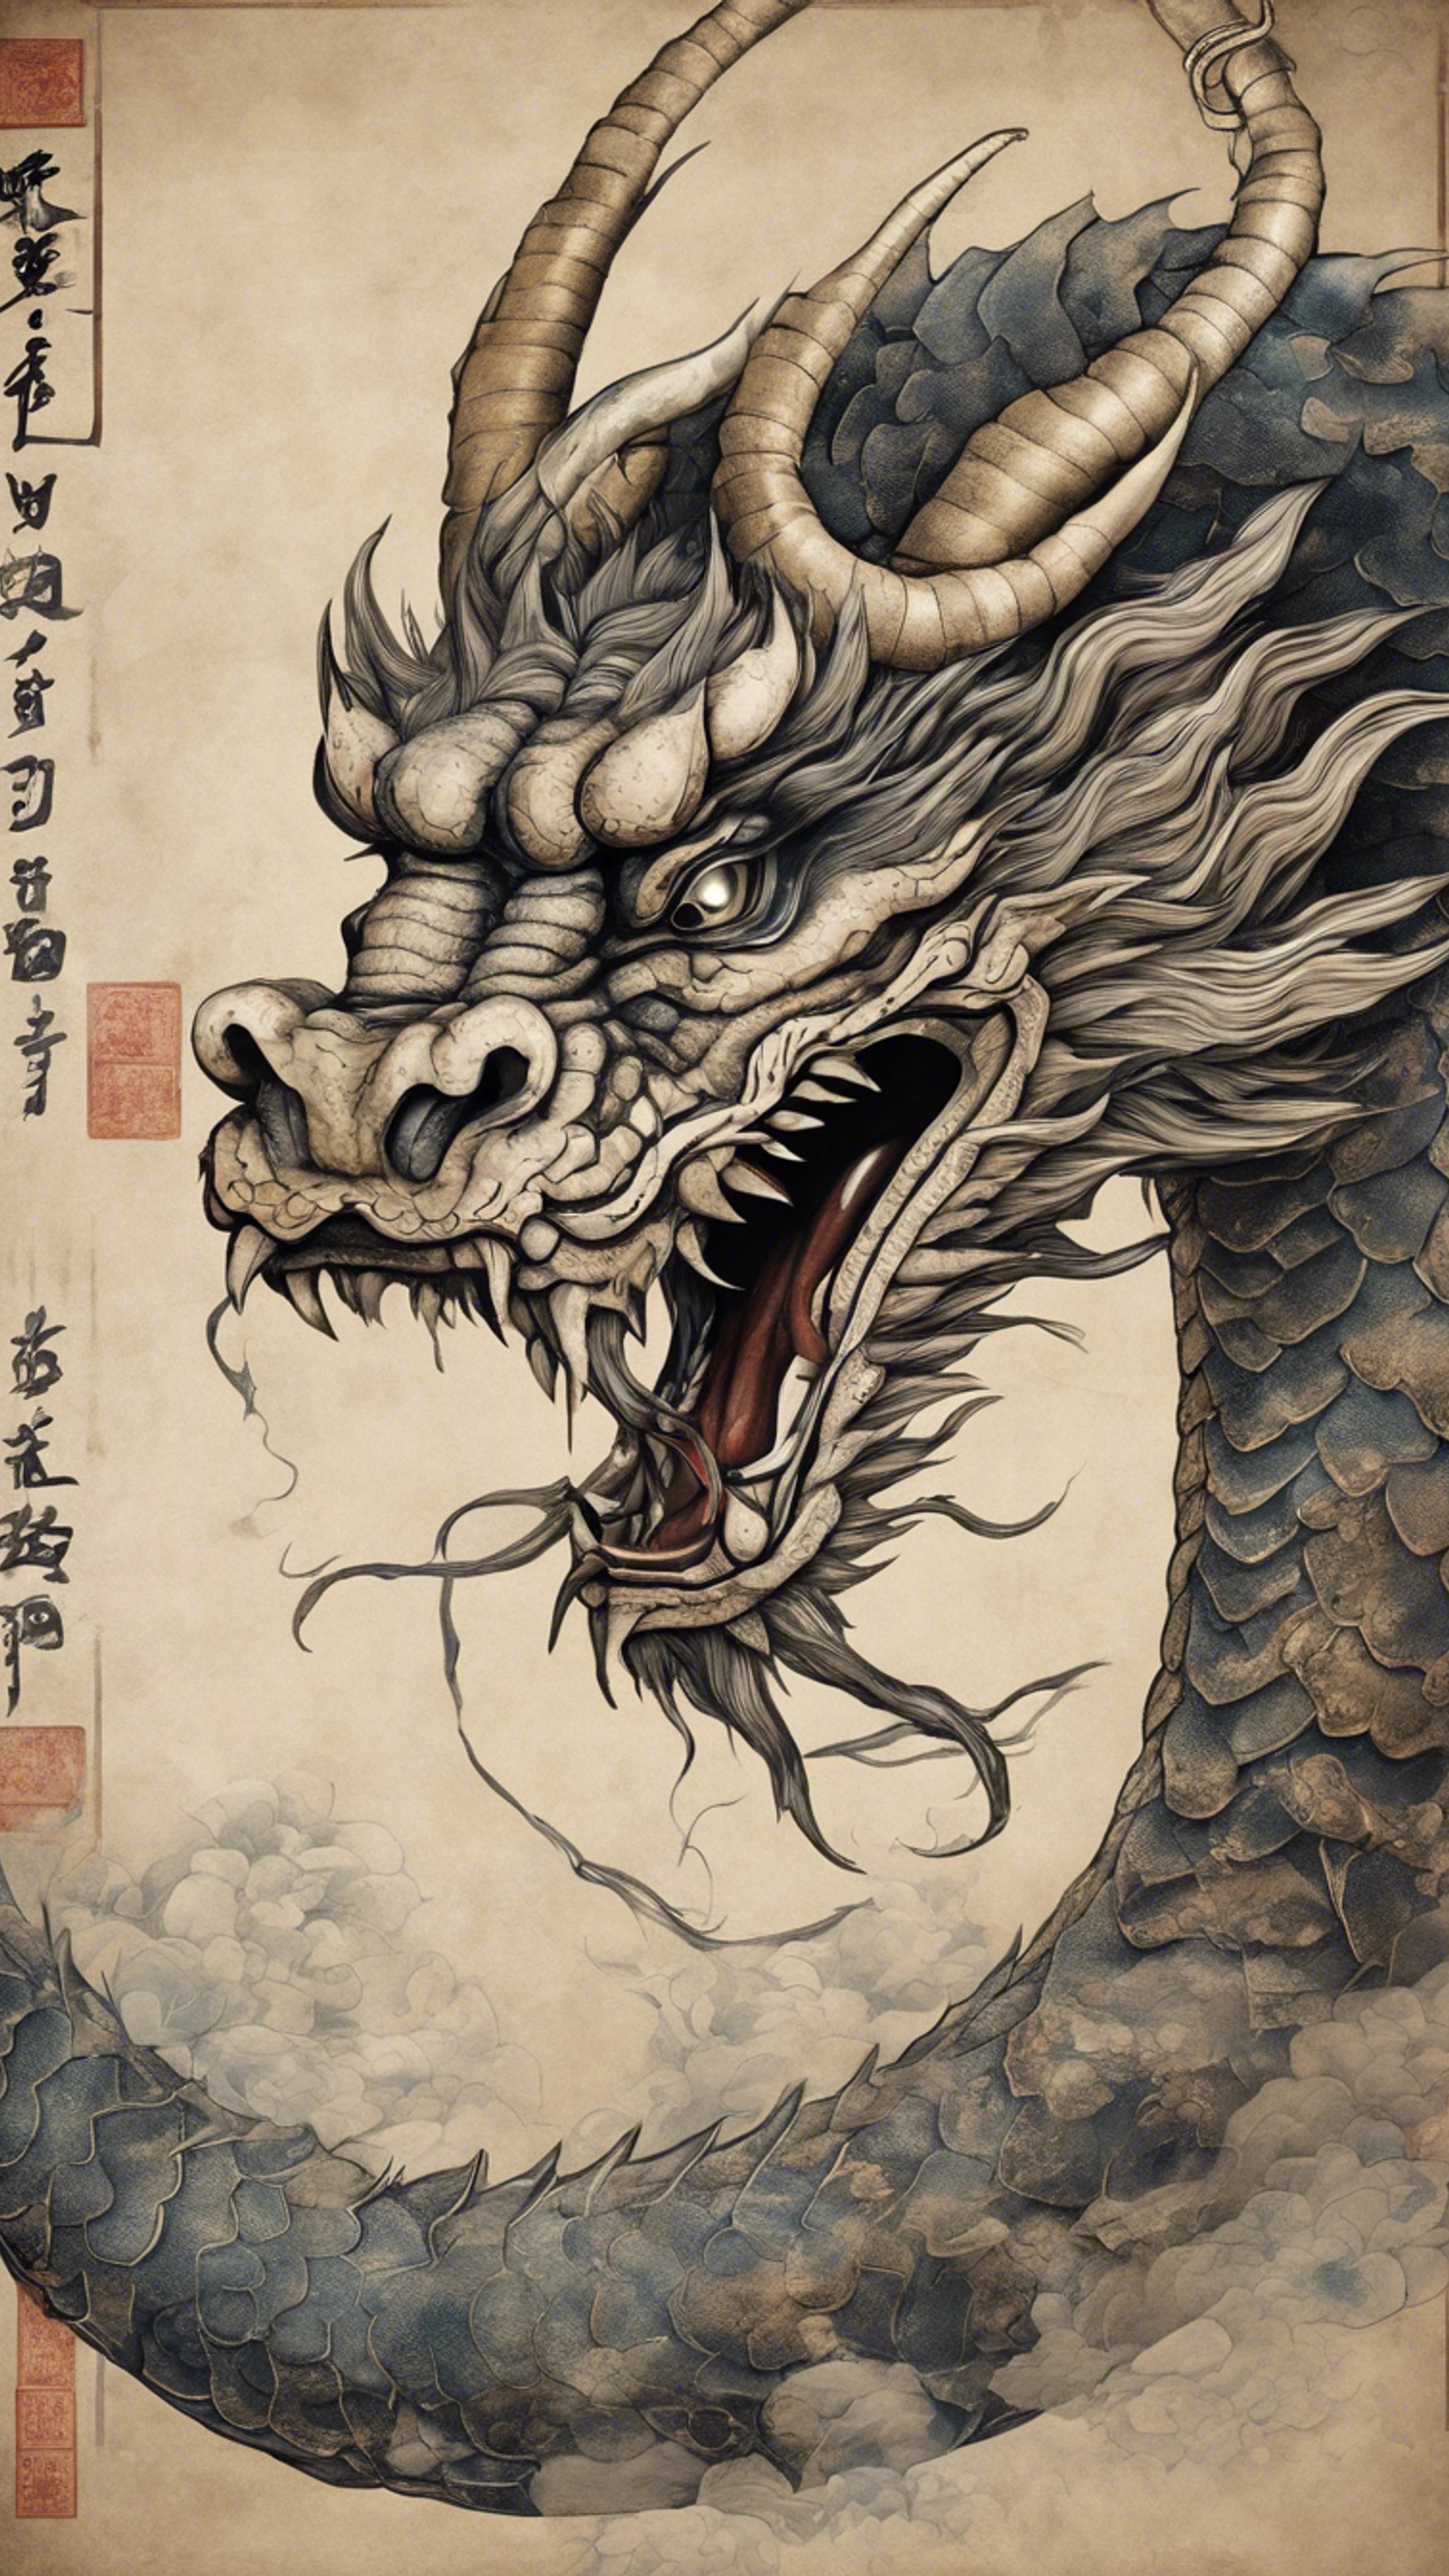 A majestic Japanese dragon illustrated in an ancient scroll. Тапет[ee61e4c394914154b9e3]